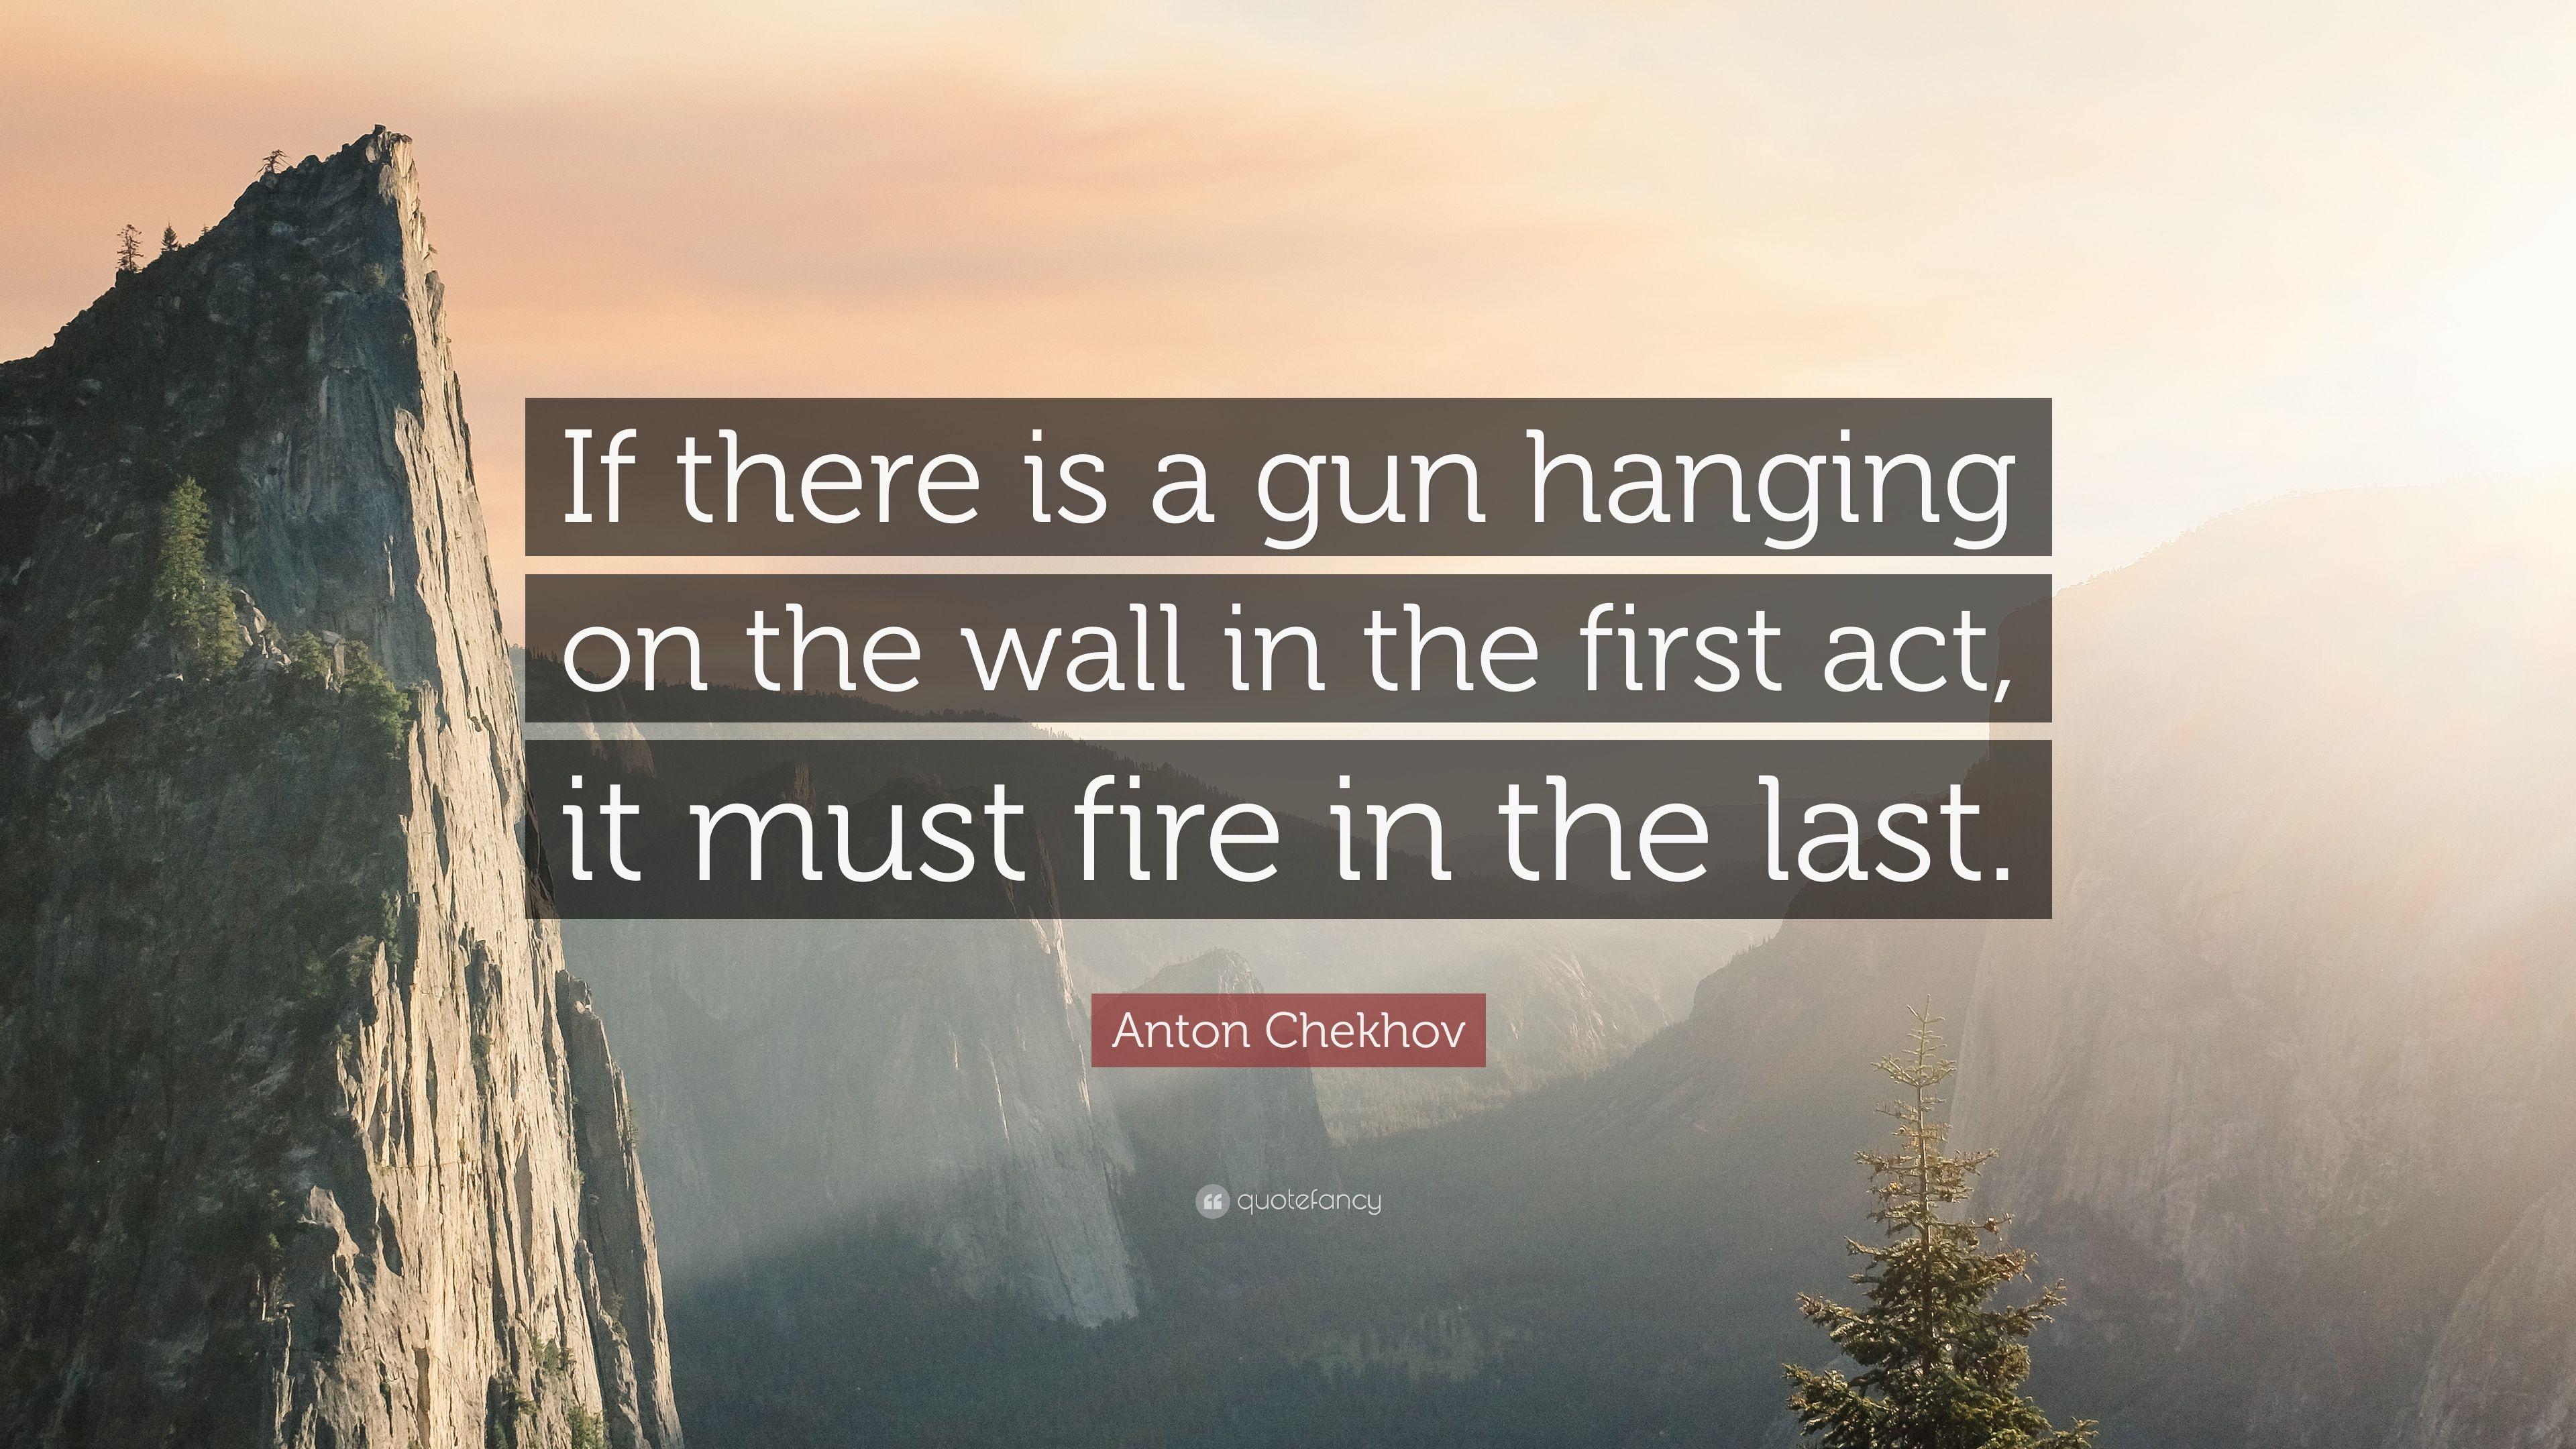 Anton Chekhov Quote: “If there is a gun hanging on the wall in